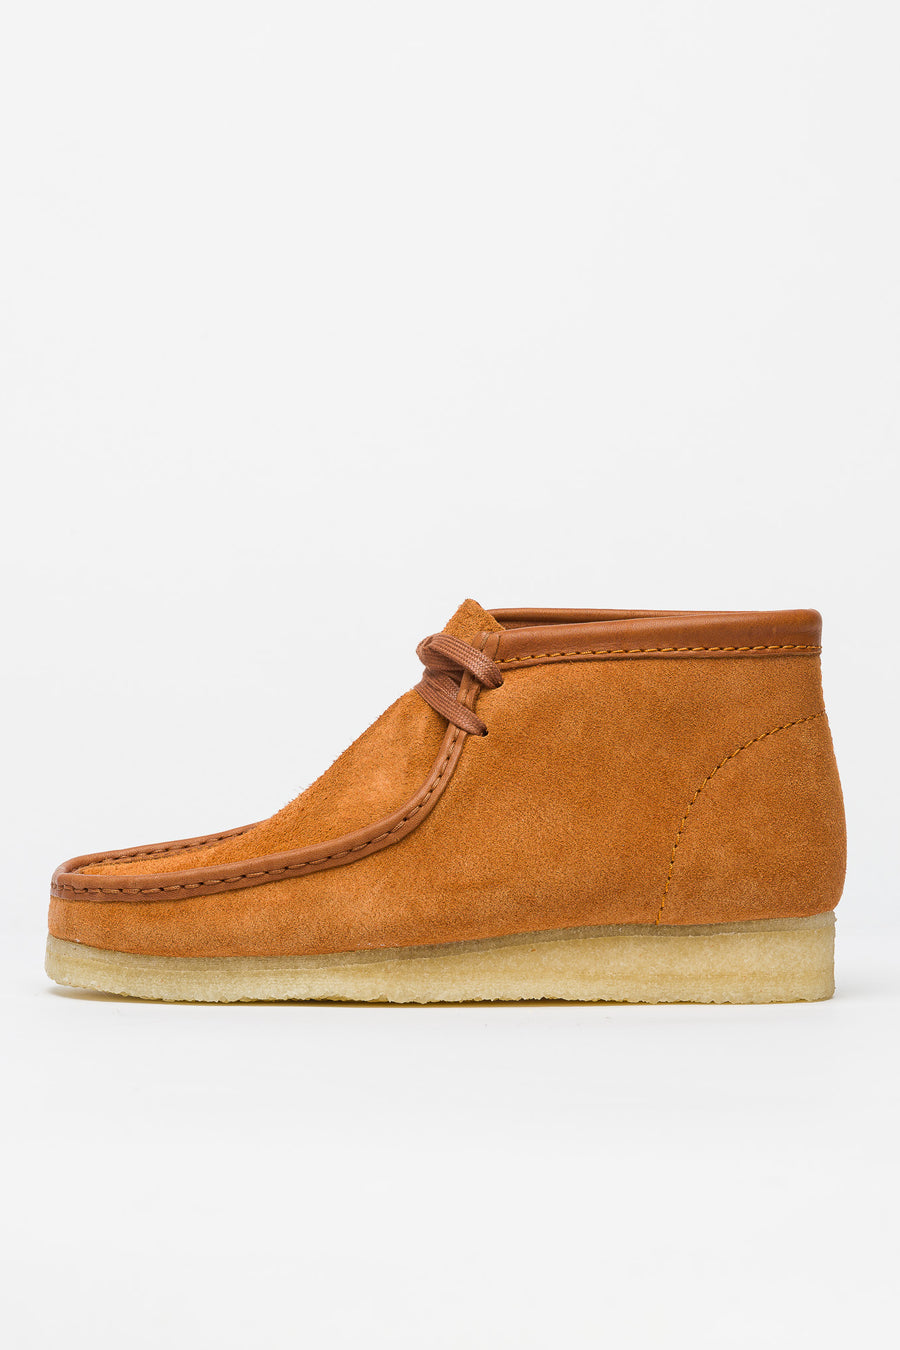 suede wallabee boots